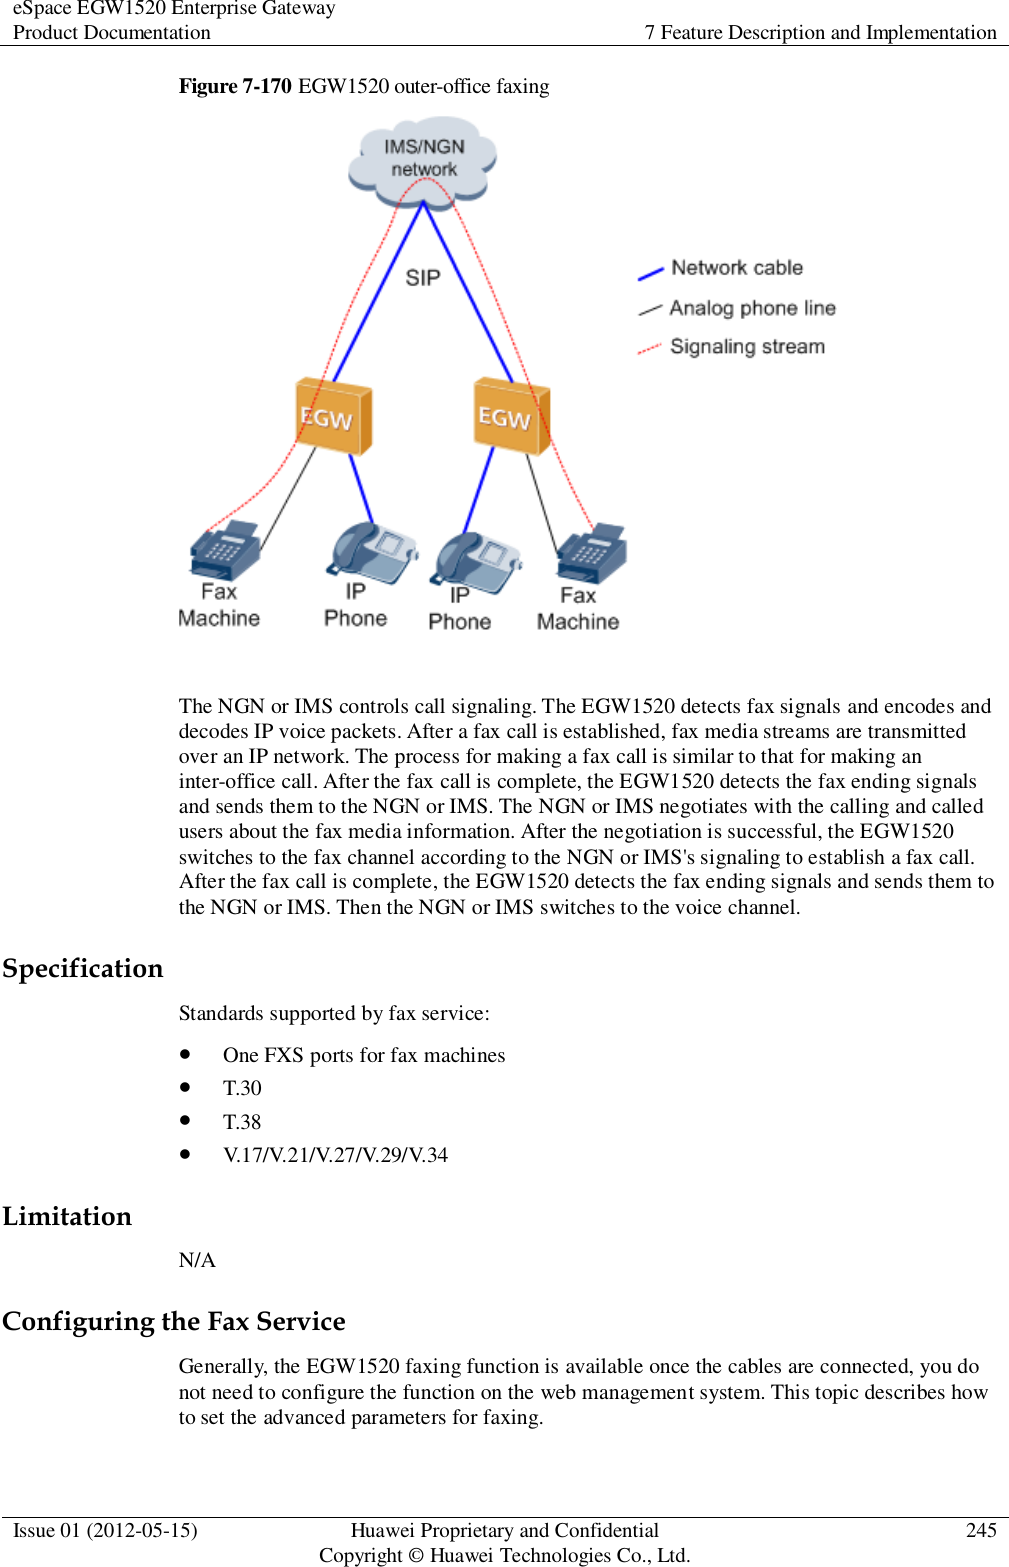 eSpace EGW1520 Enterprise Gateway Product Documentation 7 Feature Description and Implementation  Issue 01 (2012-05-15) Huawei Proprietary and Confidential                                     Copyright © Huawei Technologies Co., Ltd. 245  Figure 7-170 EGW1520 outer-office faxing   The NGN or IMS controls call signaling. The EGW1520 detects fax signals and encodes and decodes IP voice packets. After a fax call is established, fax media streams are transmitted over an IP network. The process for making a fax call is similar to that for making an inter-office call. After the fax call is complete, the EGW1520 detects the fax ending signals and sends them to the NGN or IMS. The NGN or IMS negotiates with the calling and called users about the fax media information. After the negotiation is successful, the EGW1520 switches to the fax channel according to the NGN or IMS&apos;s signaling to establish a fax call. After the fax call is complete, the EGW1520 detects the fax ending signals and sends them to the NGN or IMS. Then the NGN or IMS switches to the voice channel. Specification Standards supported by fax service:  One FXS ports for fax machines  T.30  T.38  V.17/V.21/V.27/V.29/V.34 Limitation N/A Configuring the Fax Service Generally, the EGW1520 faxing function is available once the cables are connected, you do not need to configure the function on the web management system. This topic describes how to set the advanced parameters for faxing. 